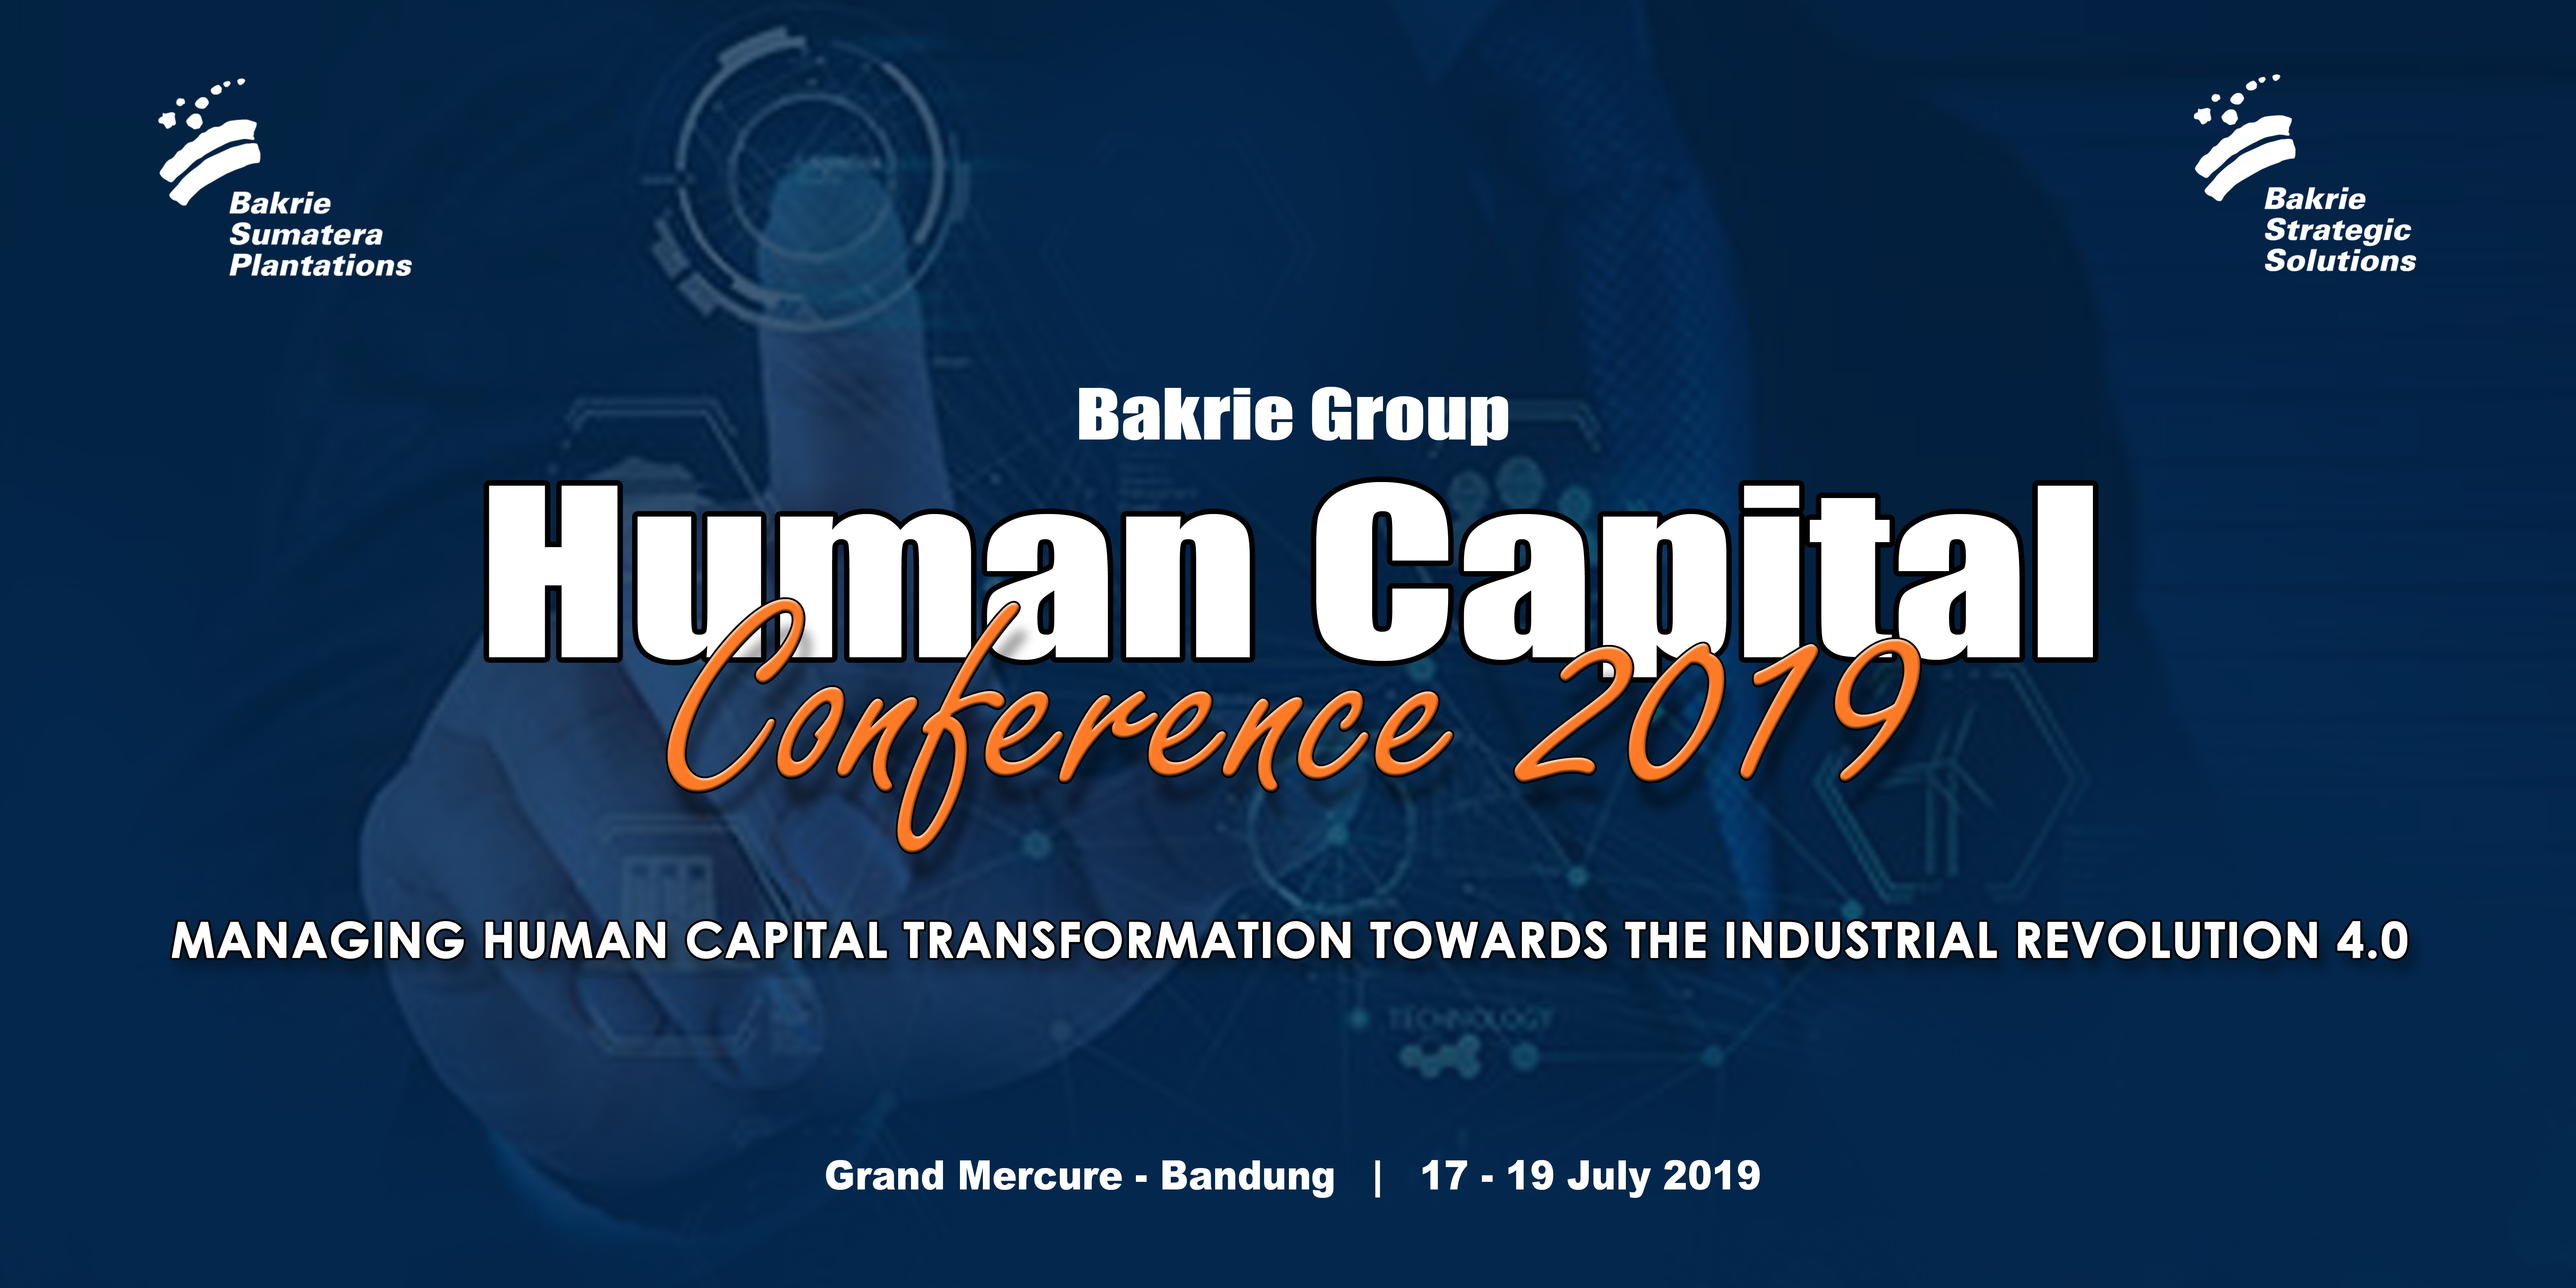 Bakrie Group Human Capital Conference